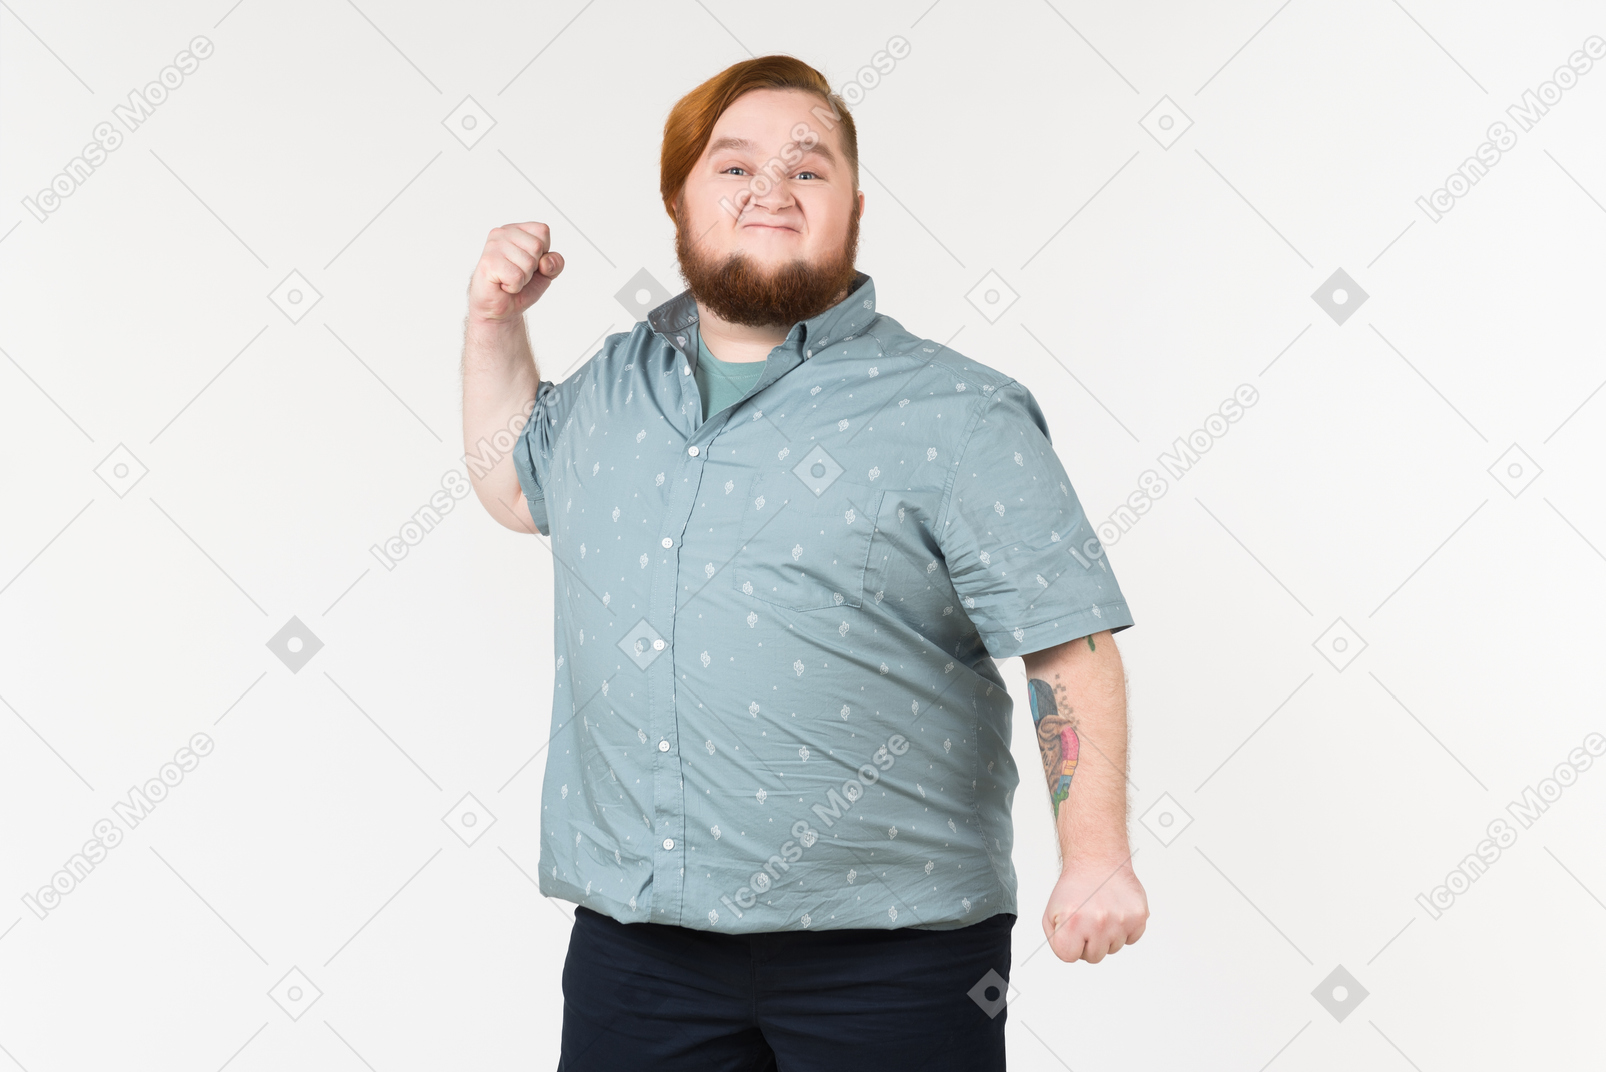 A fat man is about to hit somebody with his fist